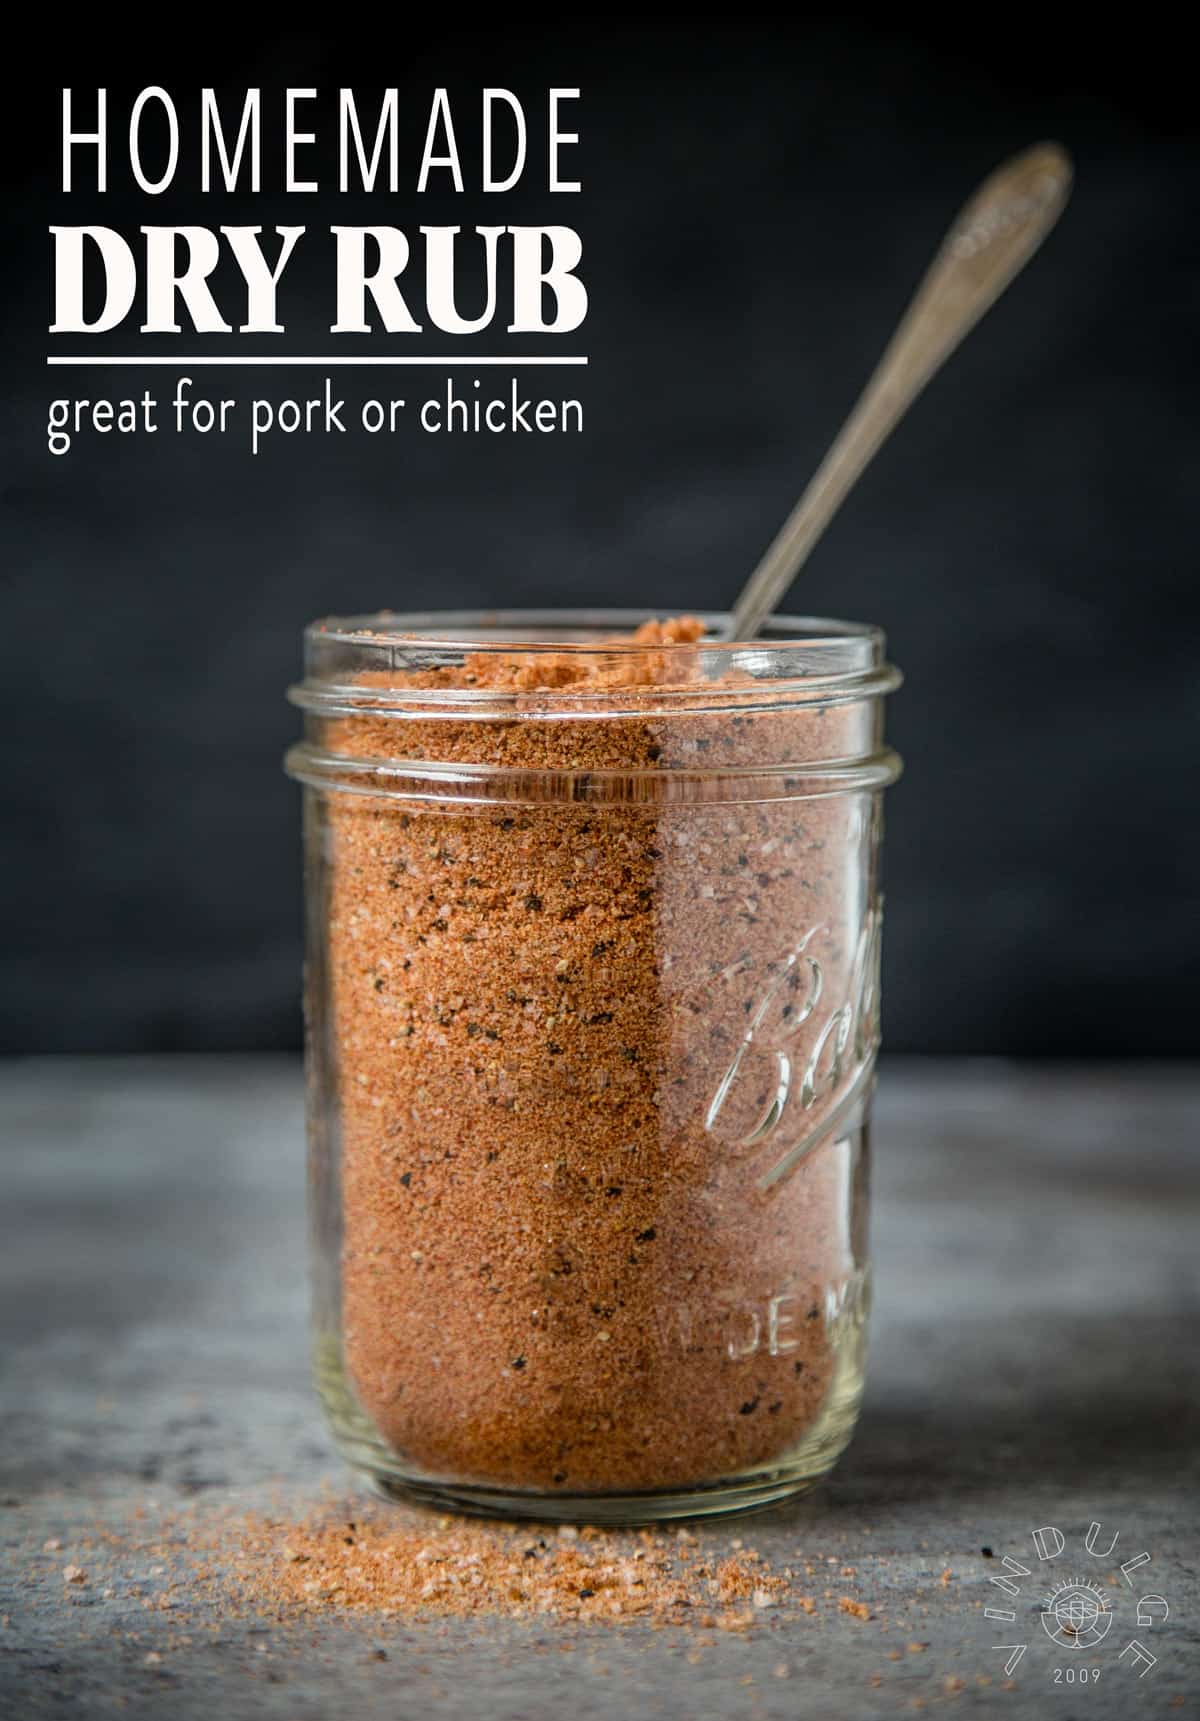 Homemade Dry Rub for Pork and Chicken with title and text overlay